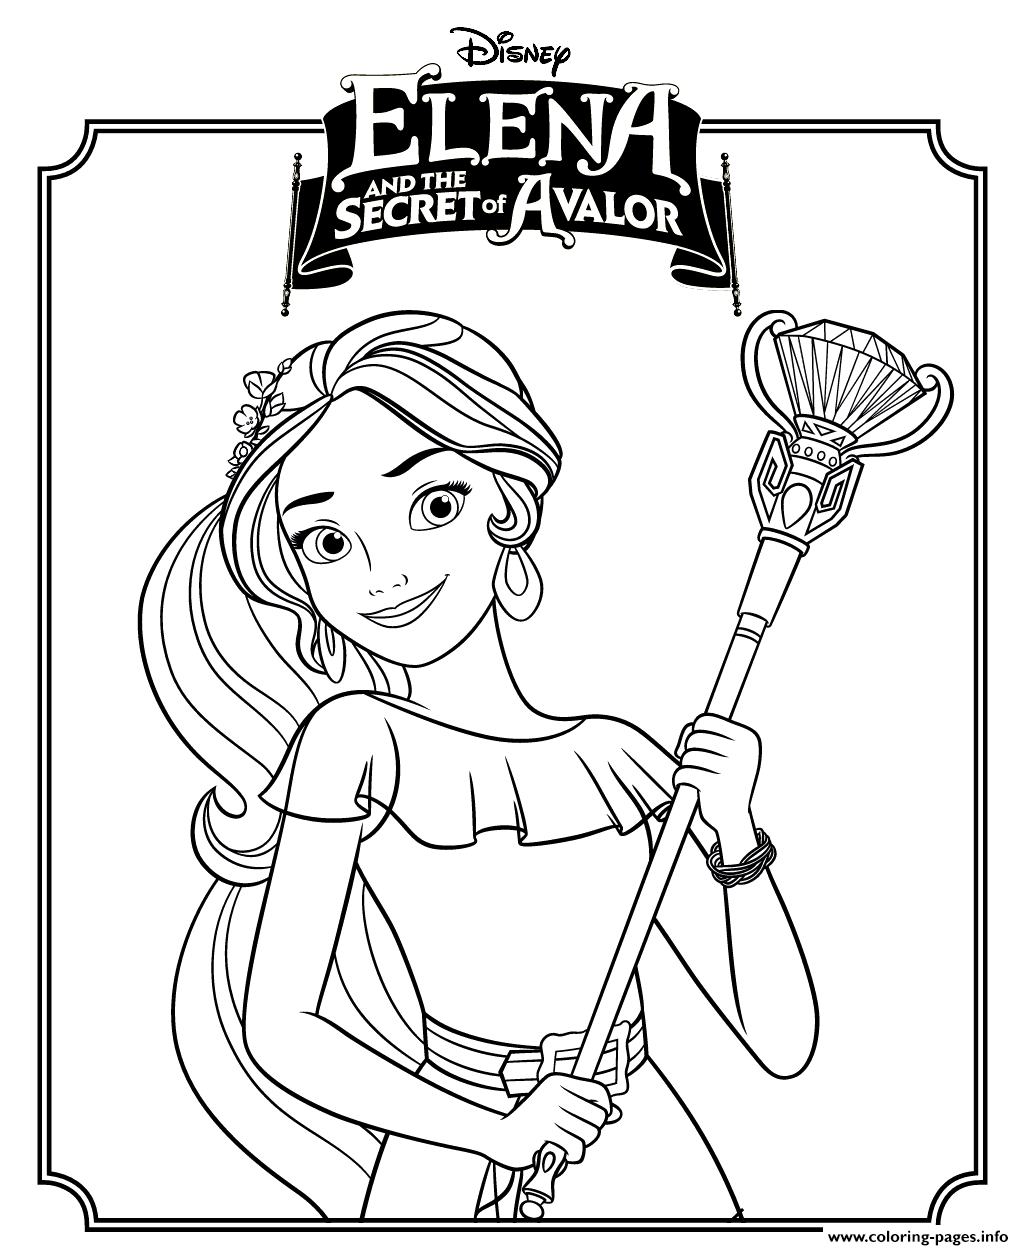 Elena and the Secret of Avalor disney princess Coloring pages Printable